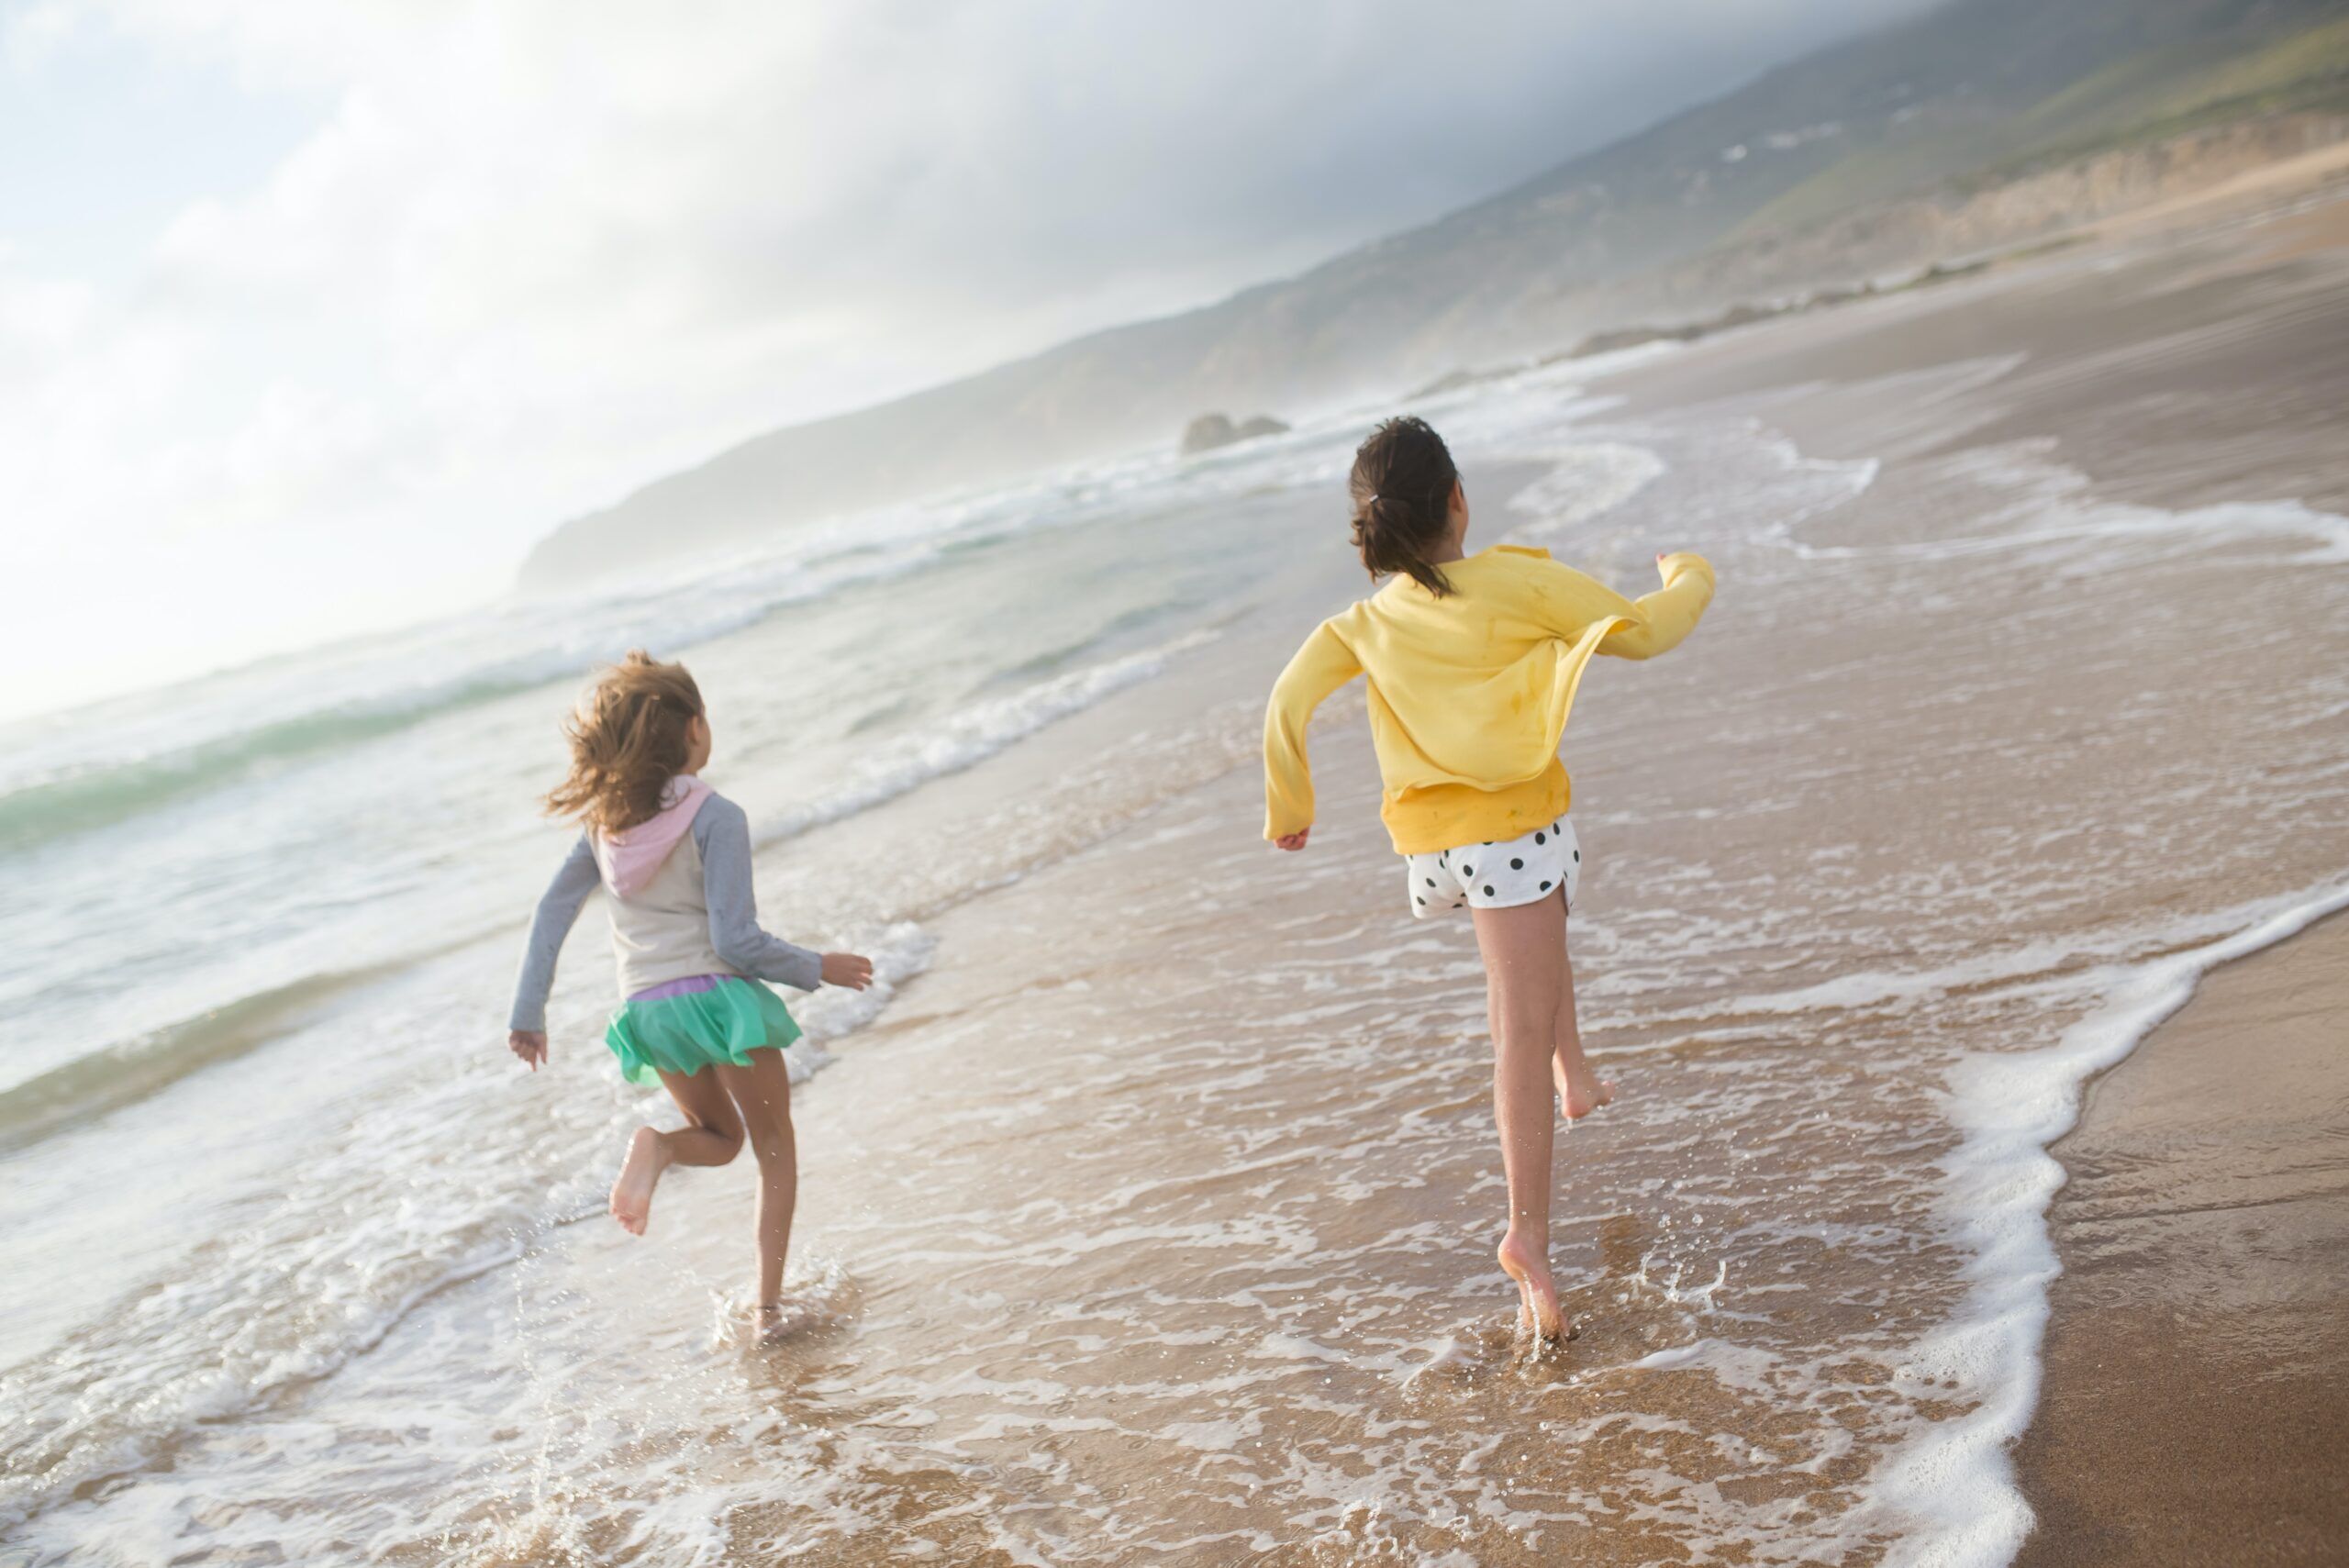 Parenting on holiday: do you let go of the reins or do you keep them short?